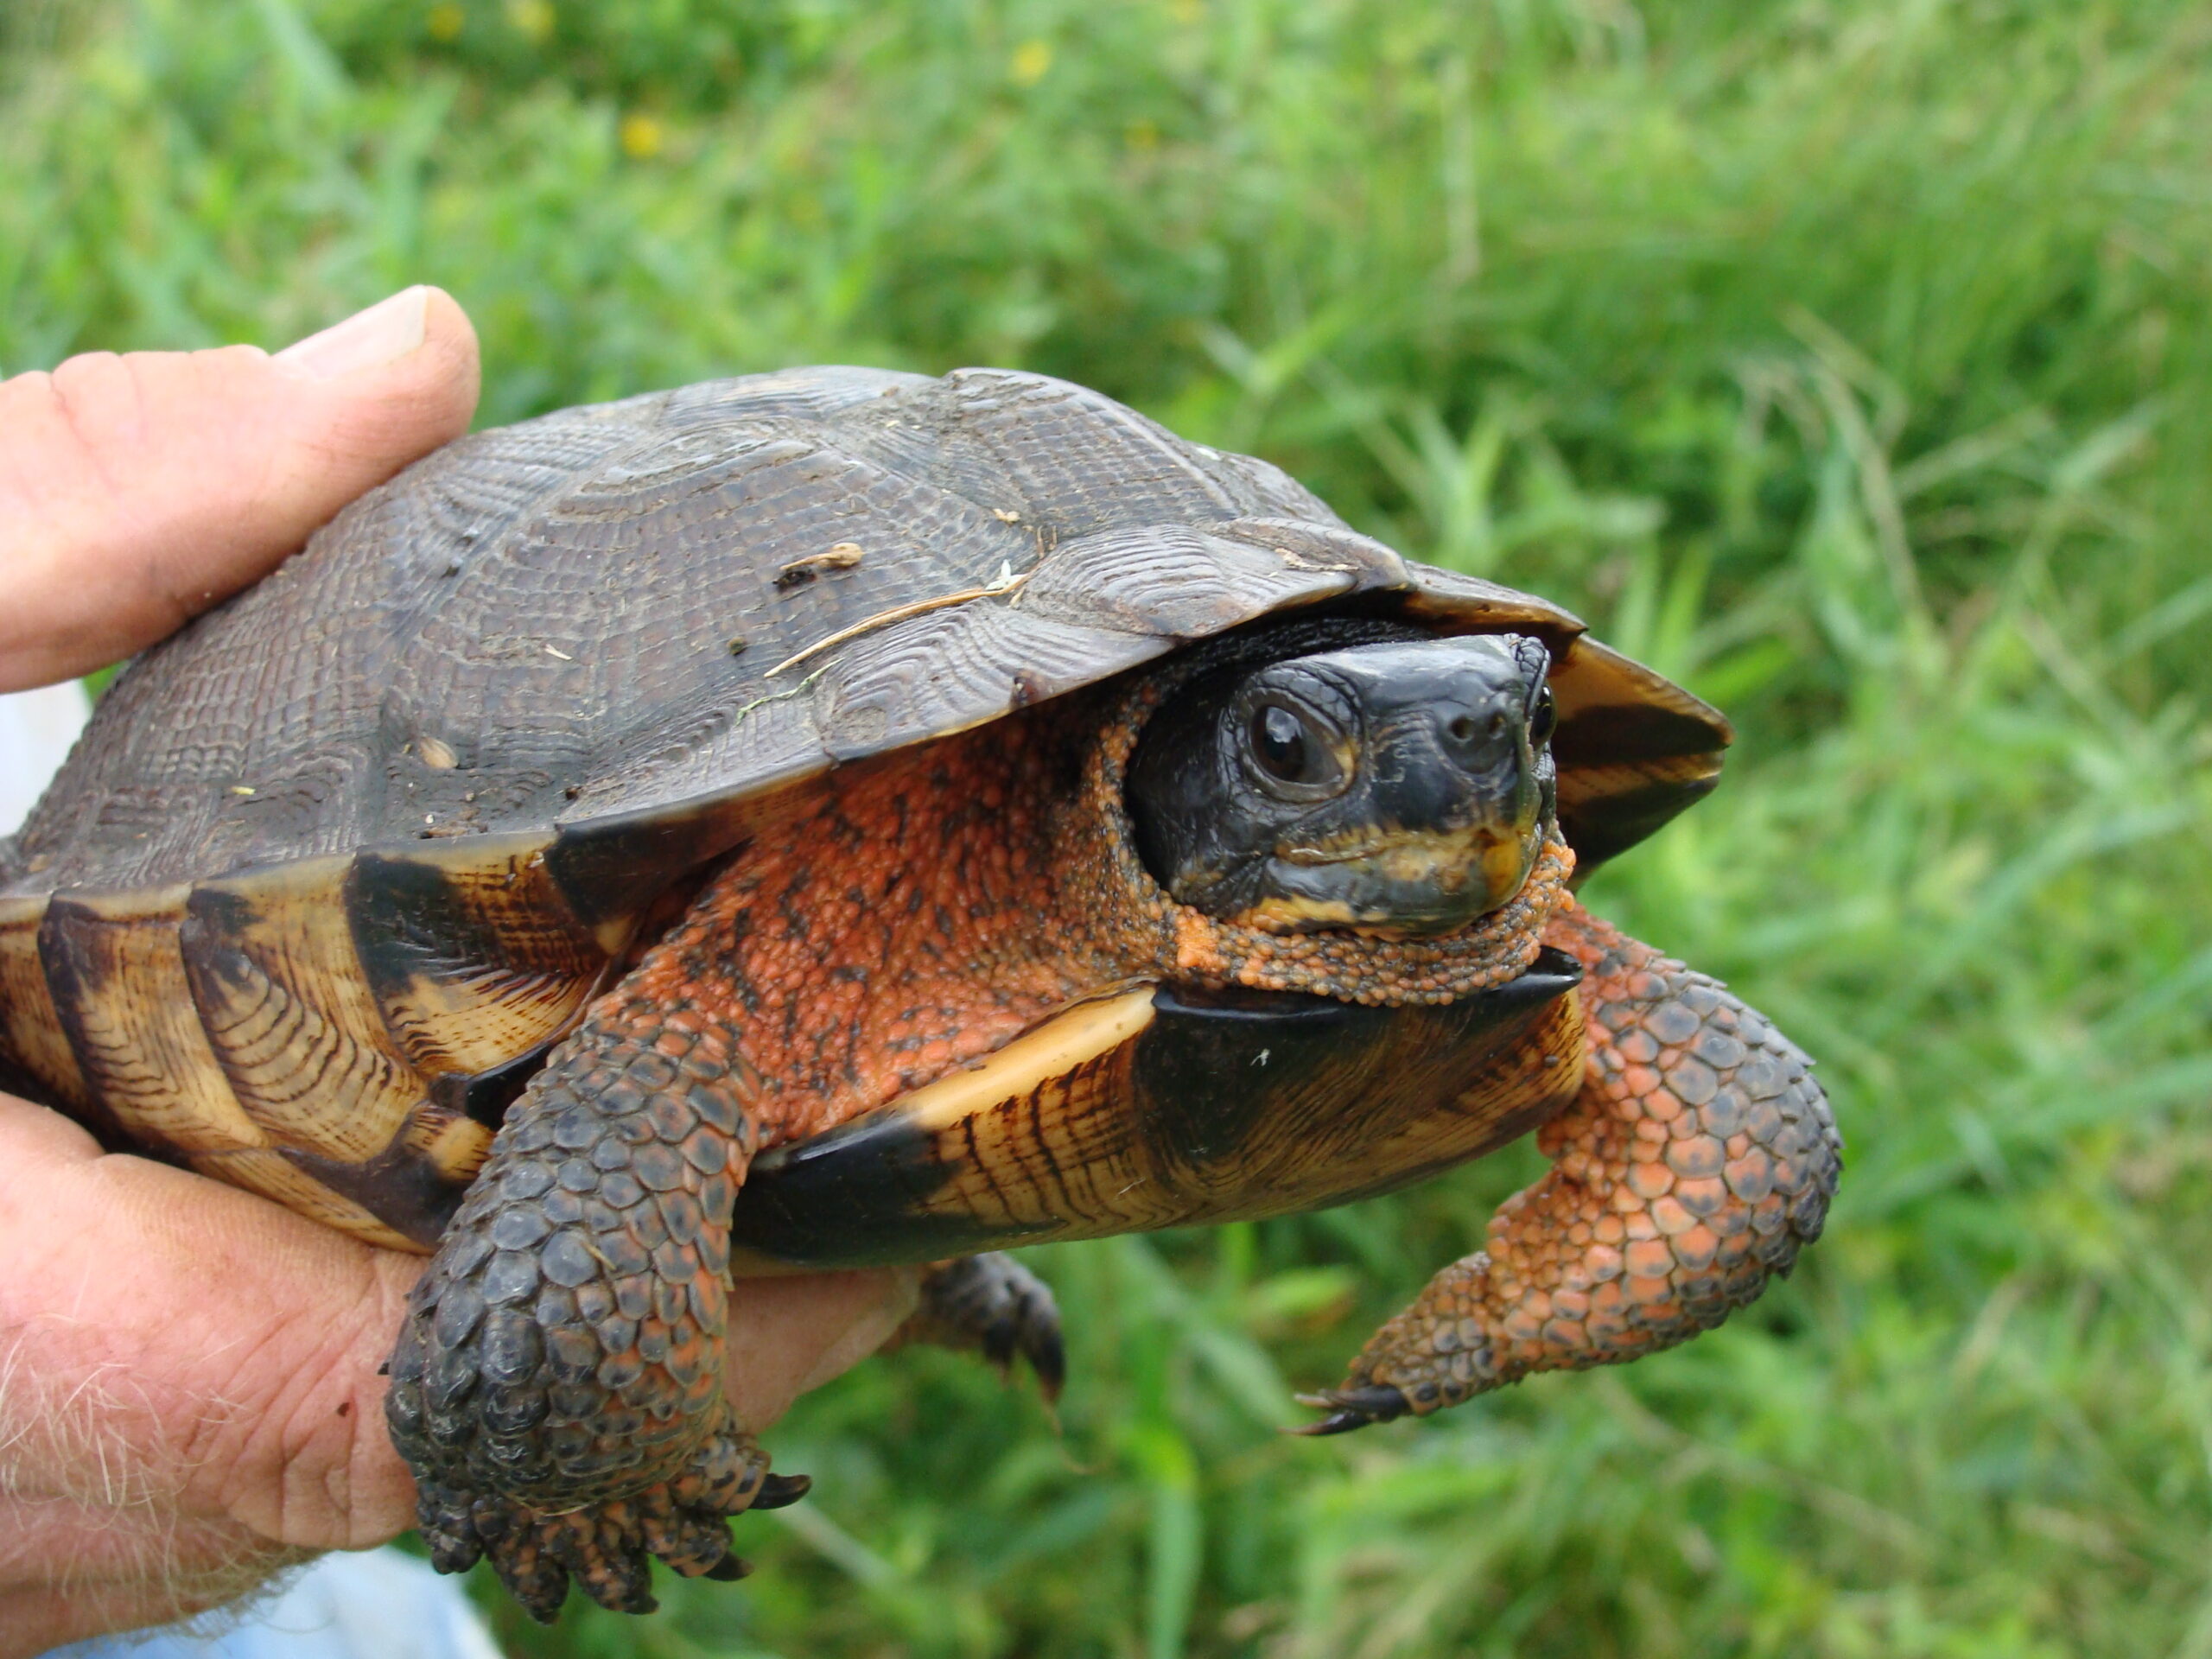 A brown and orange turtle.